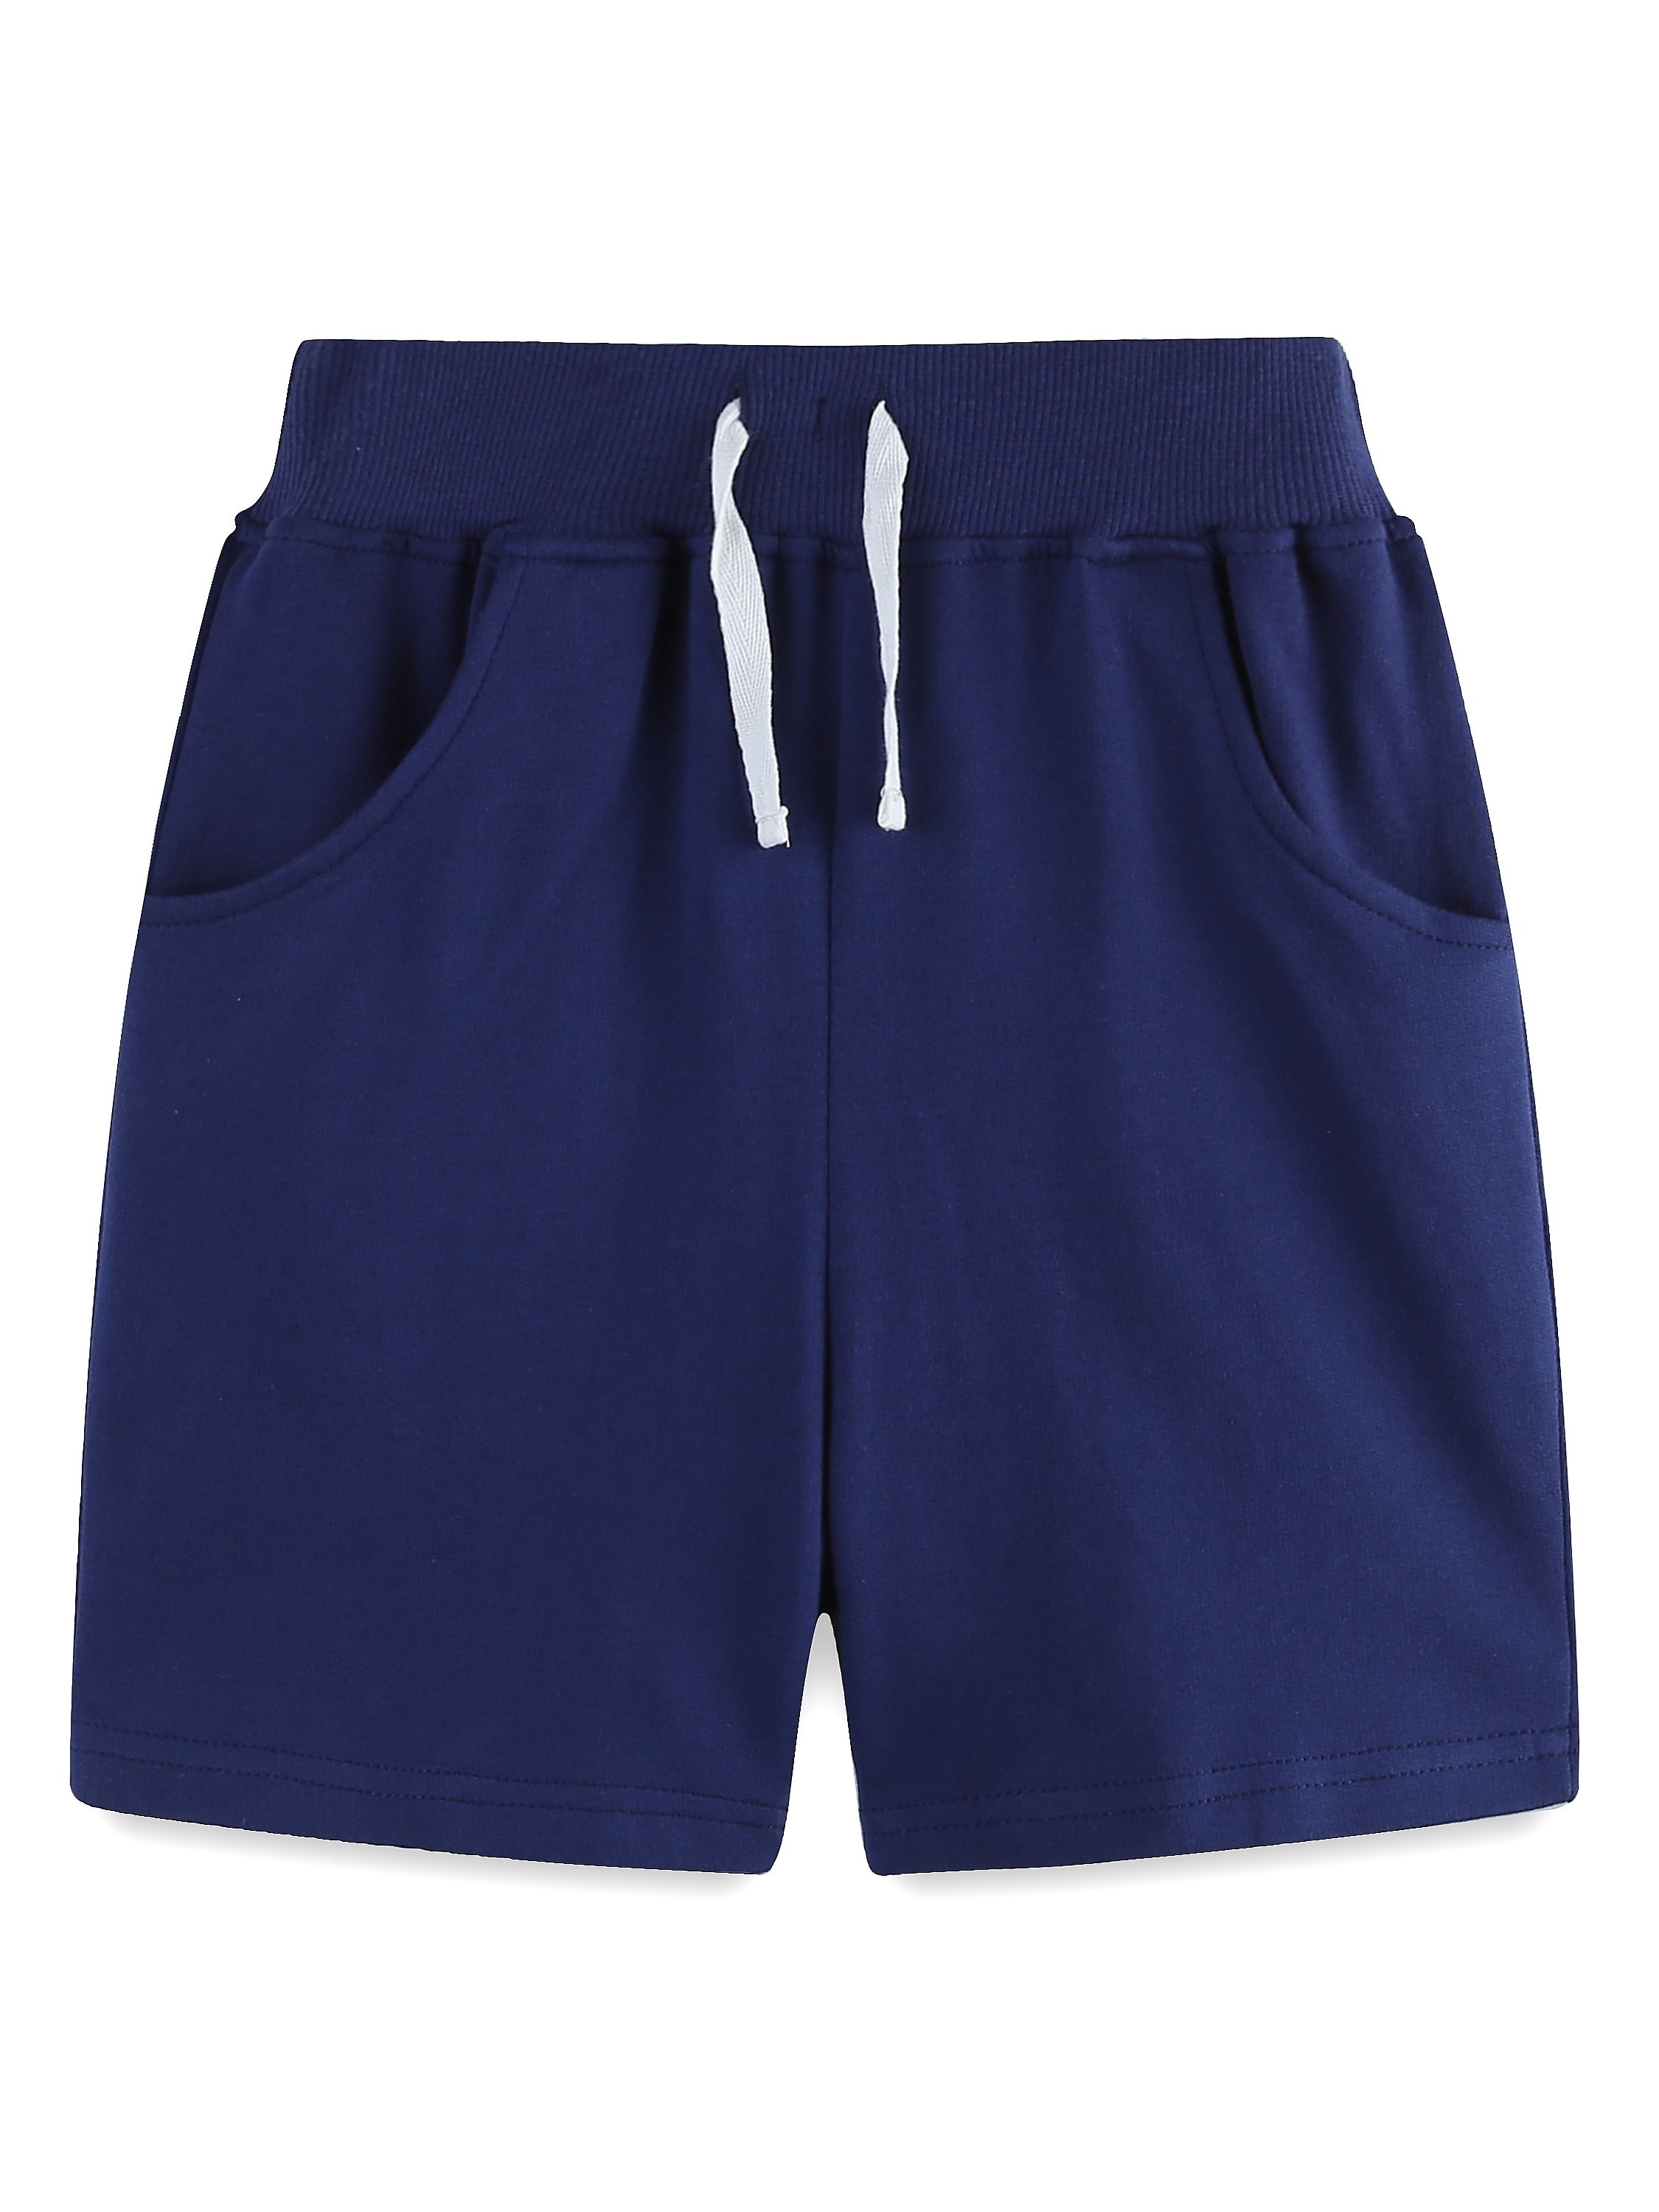 New Kids Sport bermuda for boy with drawstring: for sale at 8.99